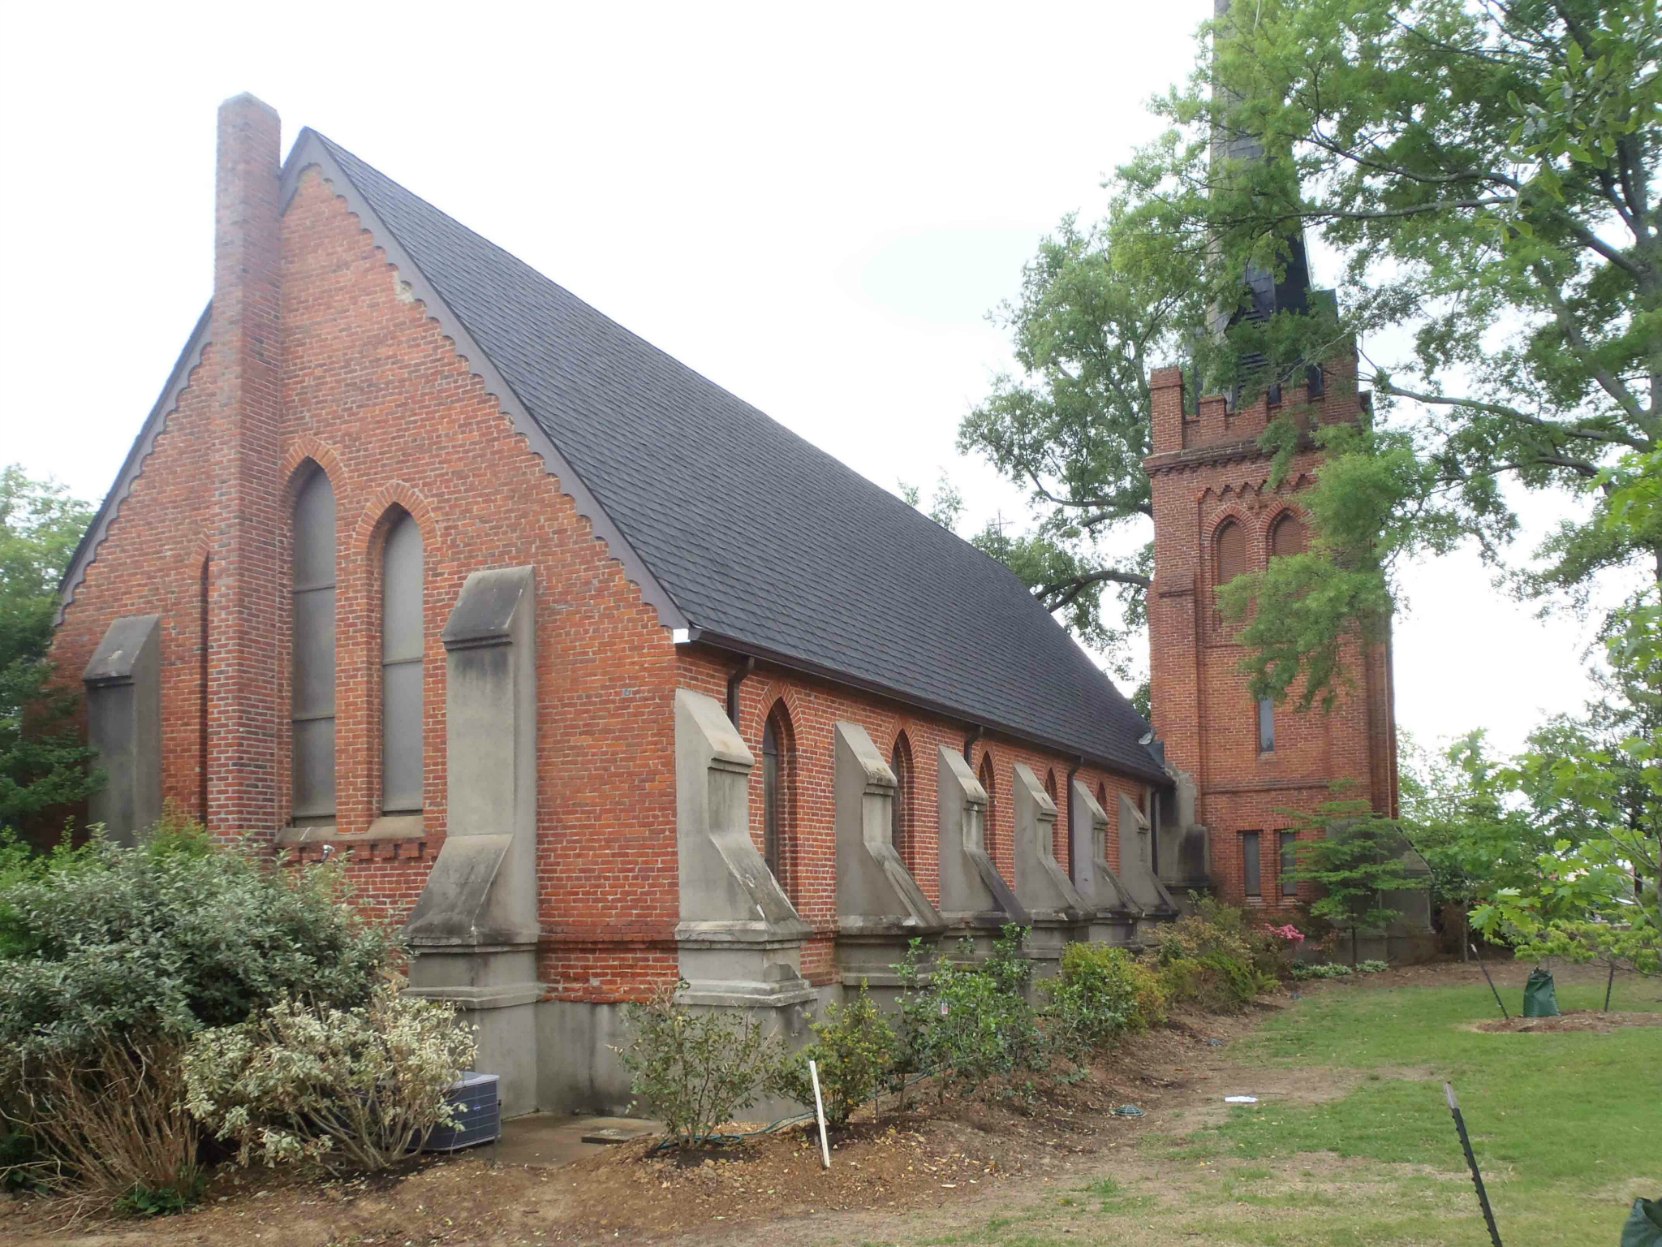 St. Peter's Episcopal Church, Oxford, Mississippi. William Faulkner was a parishioner of this church.